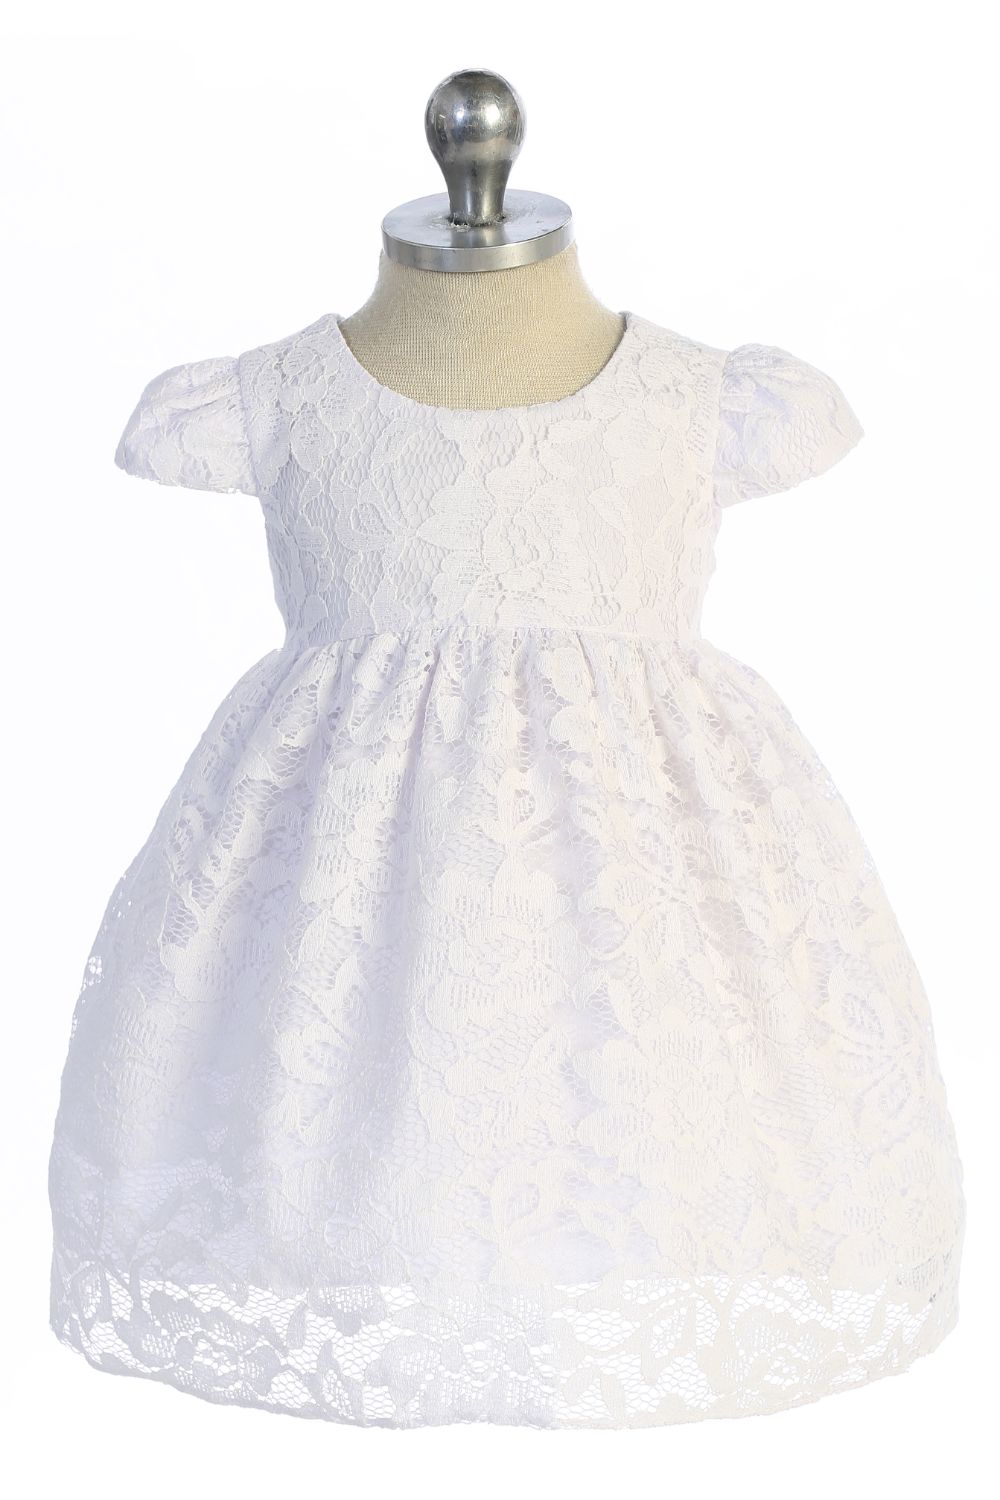 Baby Girl Lace V Back Bow Party Dress- AS532 Kids Dream